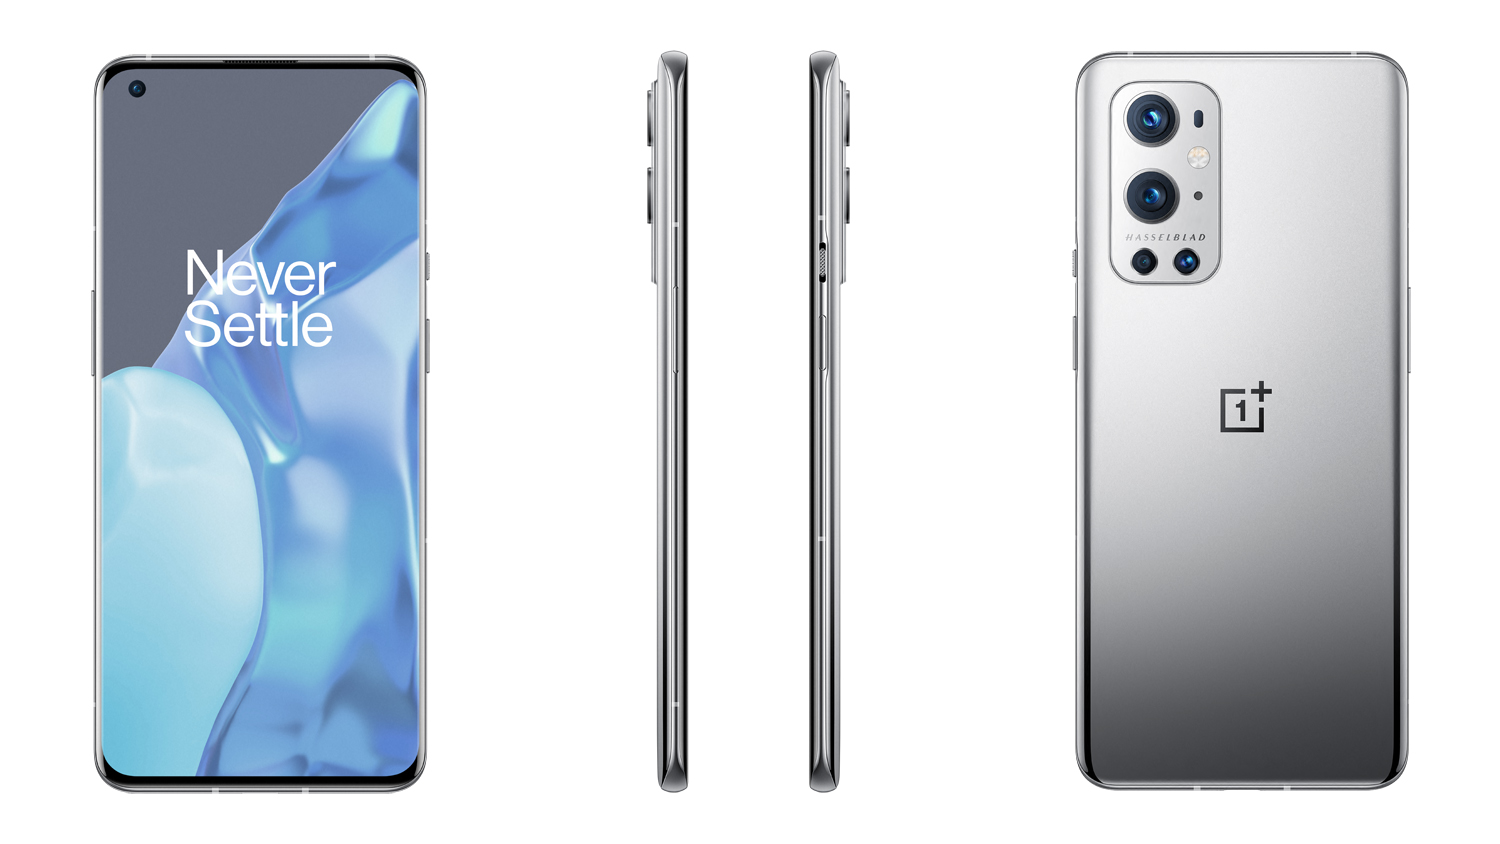 oneplus-9-pro-and-oneplus-9-hdr10+-phones-go-official